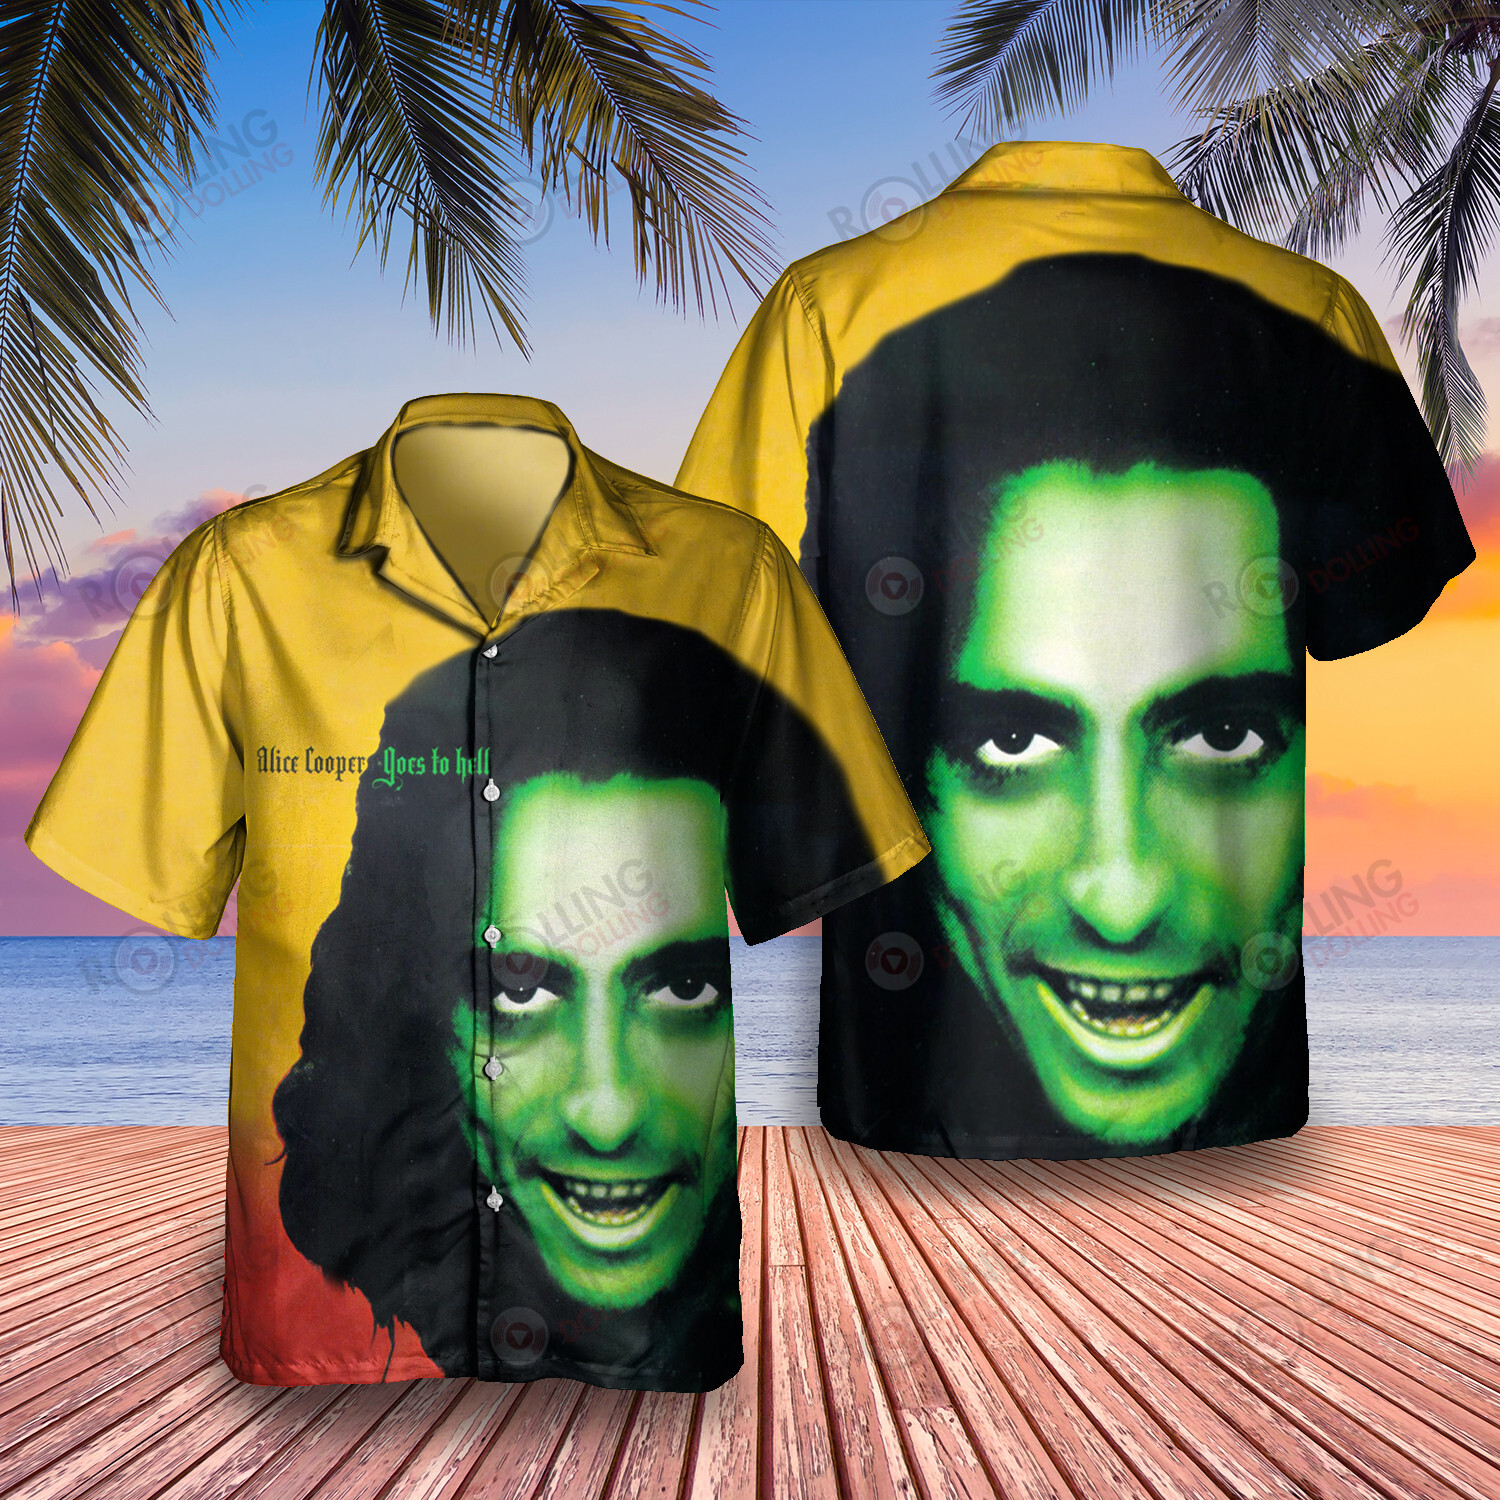 HOT Alice Cooper Goes to Hell Album Tropical Shirt1